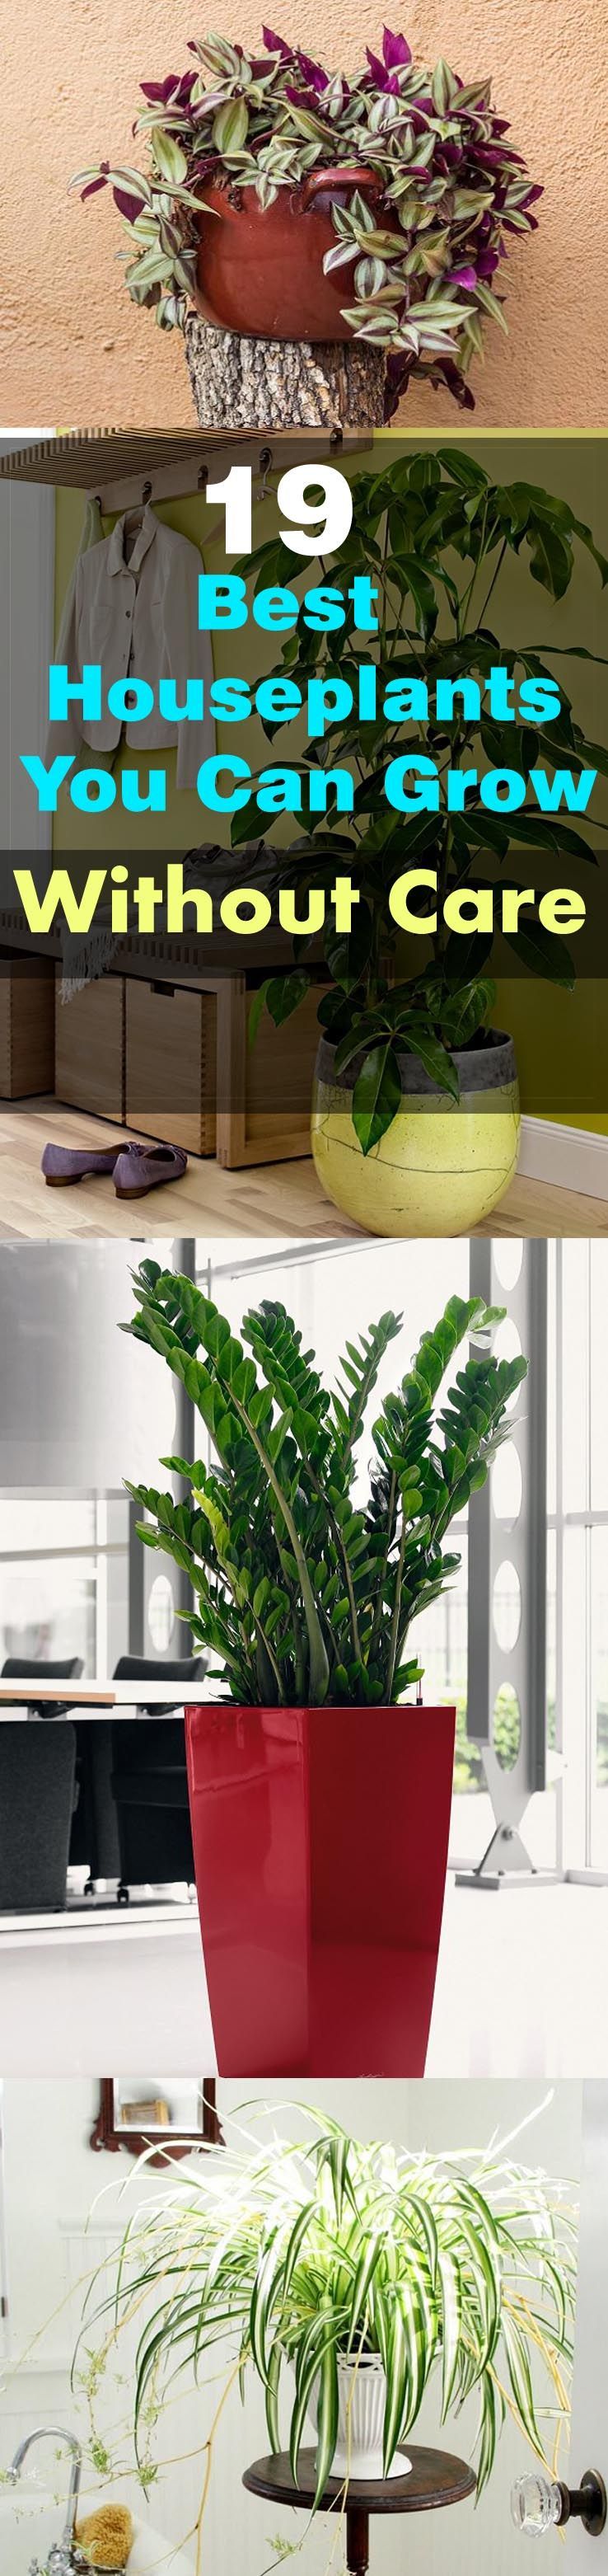 These 19 Easiest Houseplants are perfect for lazy, busy and newbies, who want to plant easy indoor plants that grow with